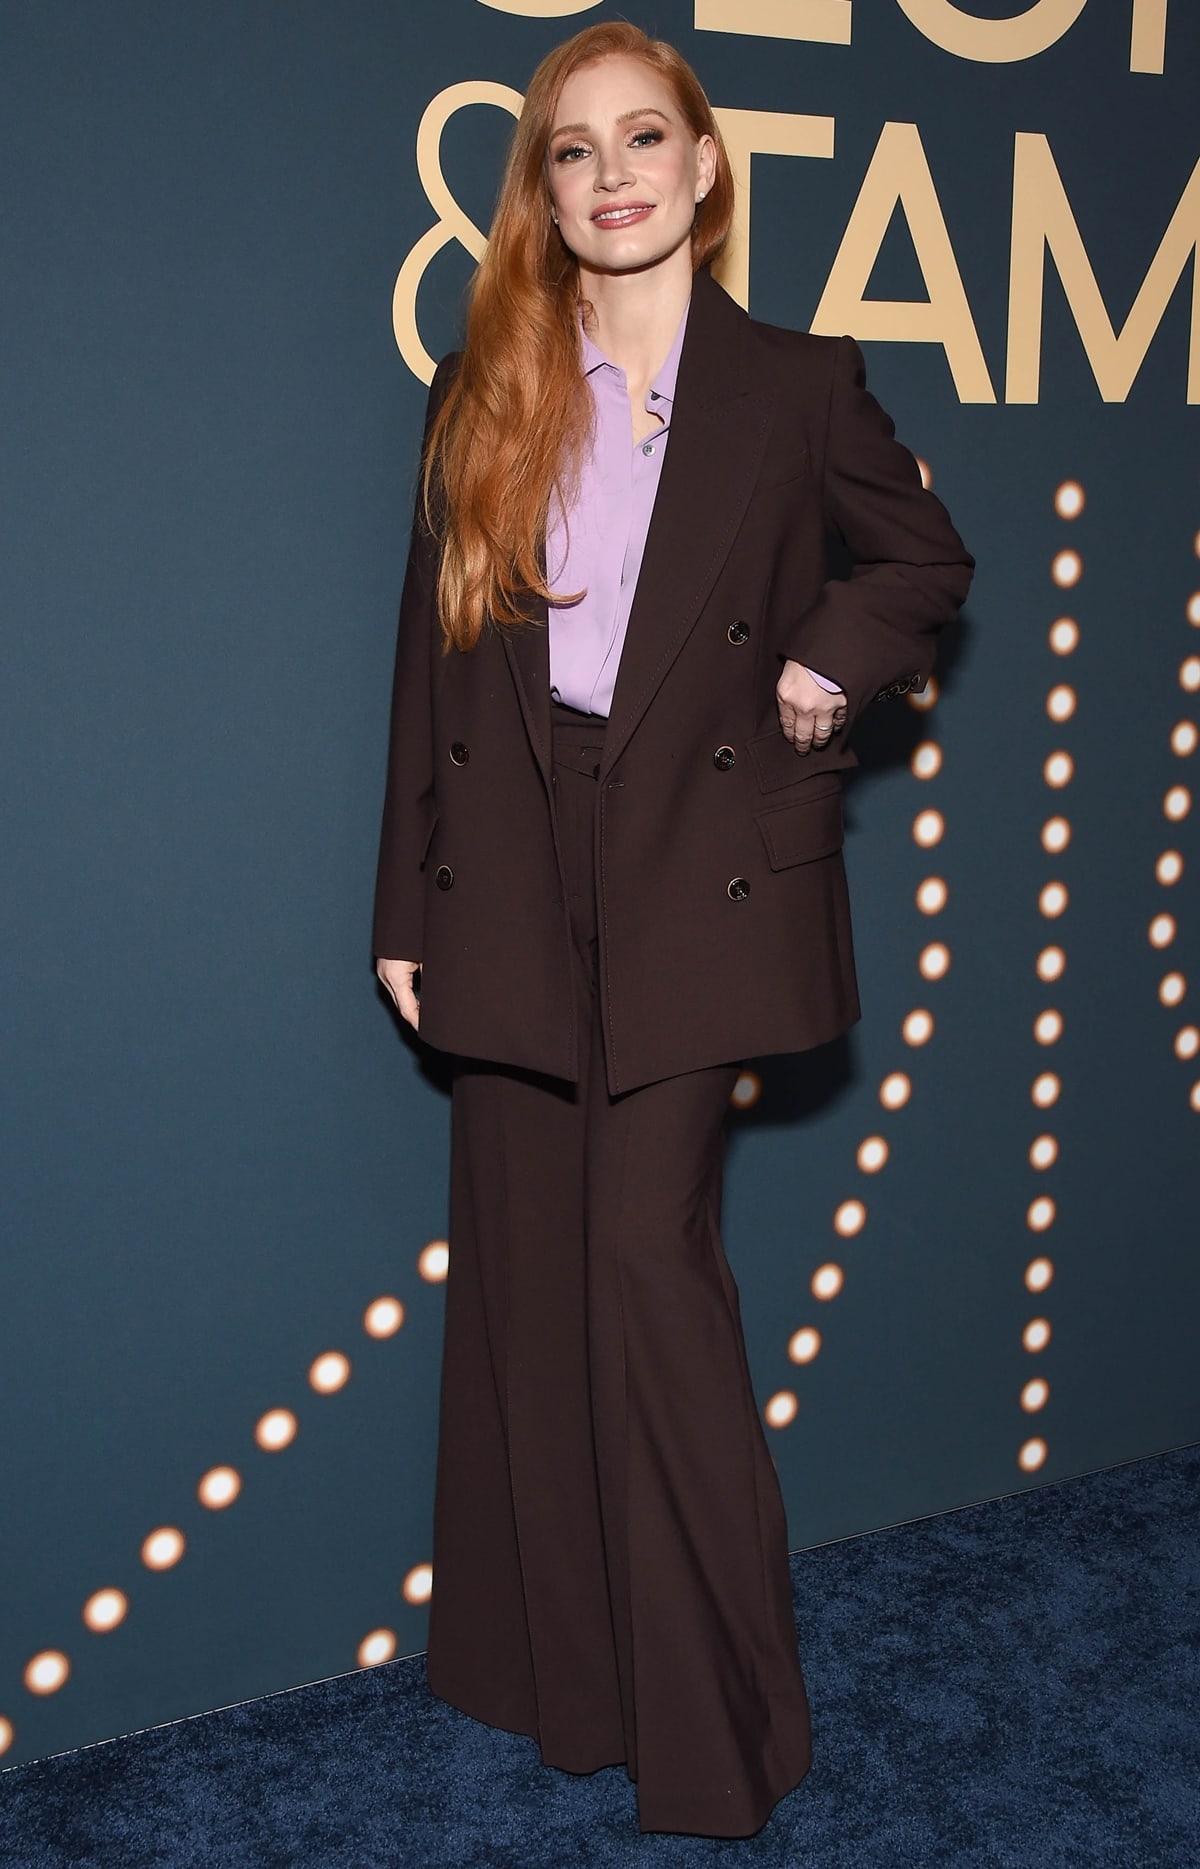 Jessica Chastain, the executive producer and star of "George & Tammy," looked stylish in a professional outfit designed by Elizabeth Stewart at Showtime's Emmy FYC event